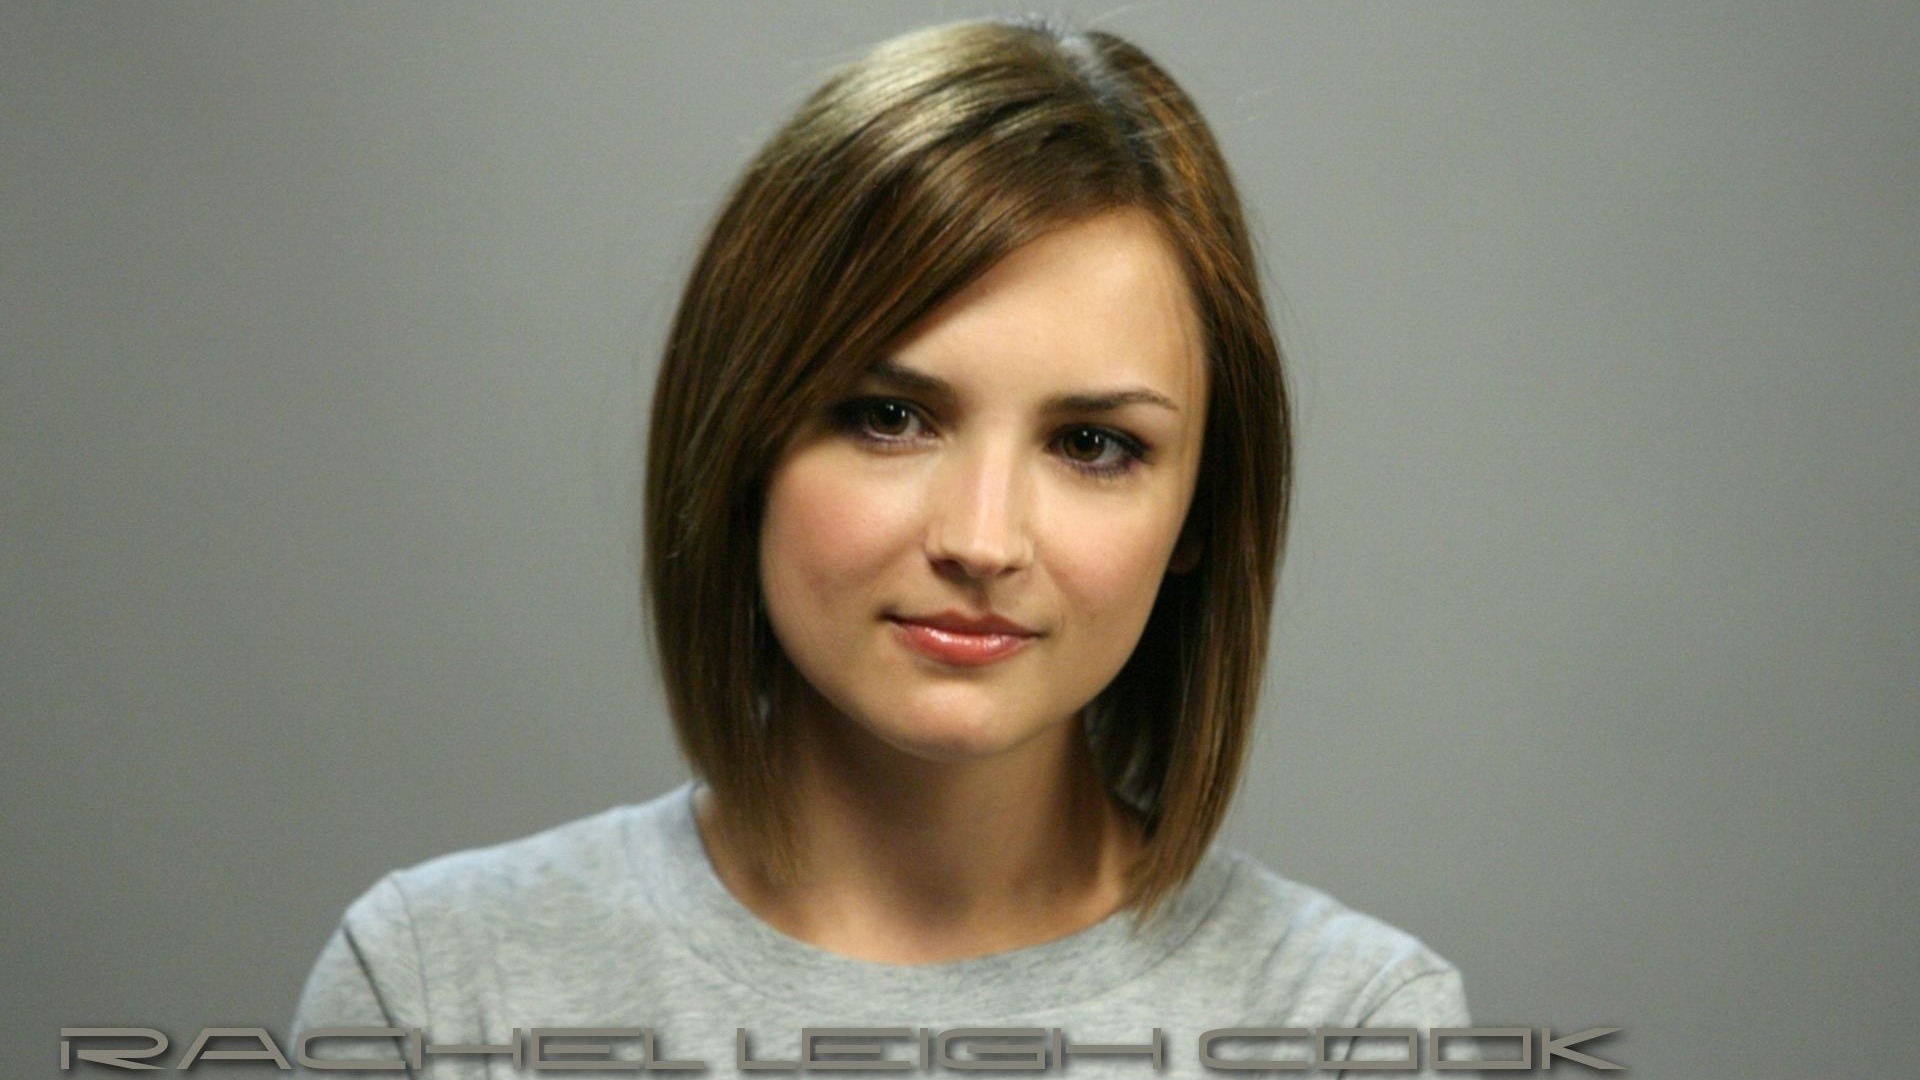 Rachael Leigh Cook #009 - 1920x1080 Wallpapers Pictures Photos Images